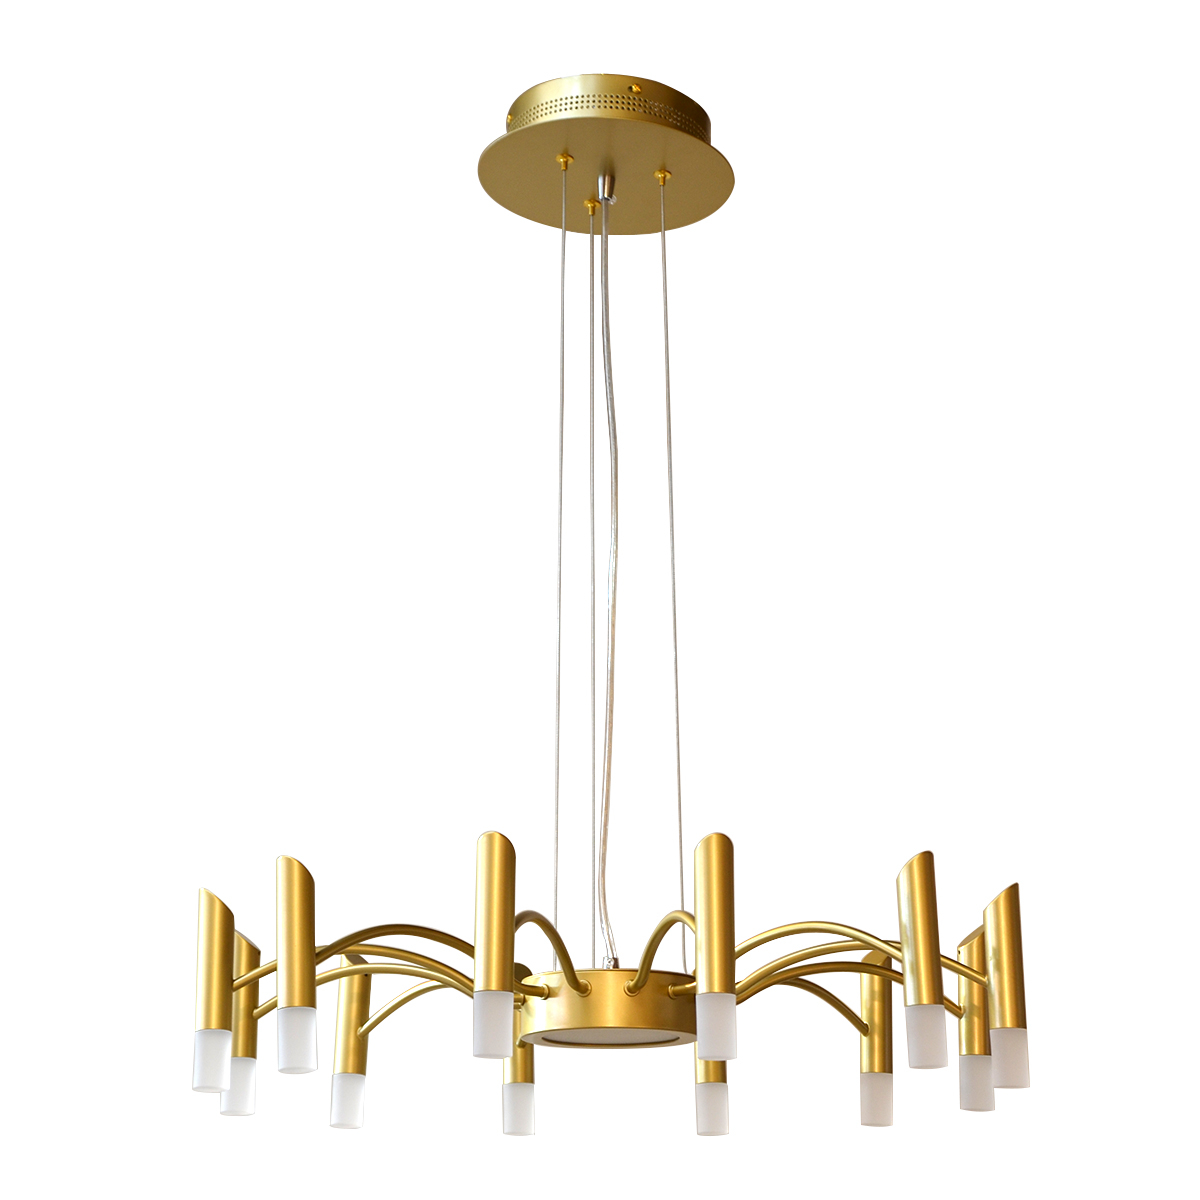 Luxury LED Lexie Chandelier 16 Arms MD2902 96W (3000K) Warm White - Brush Gold